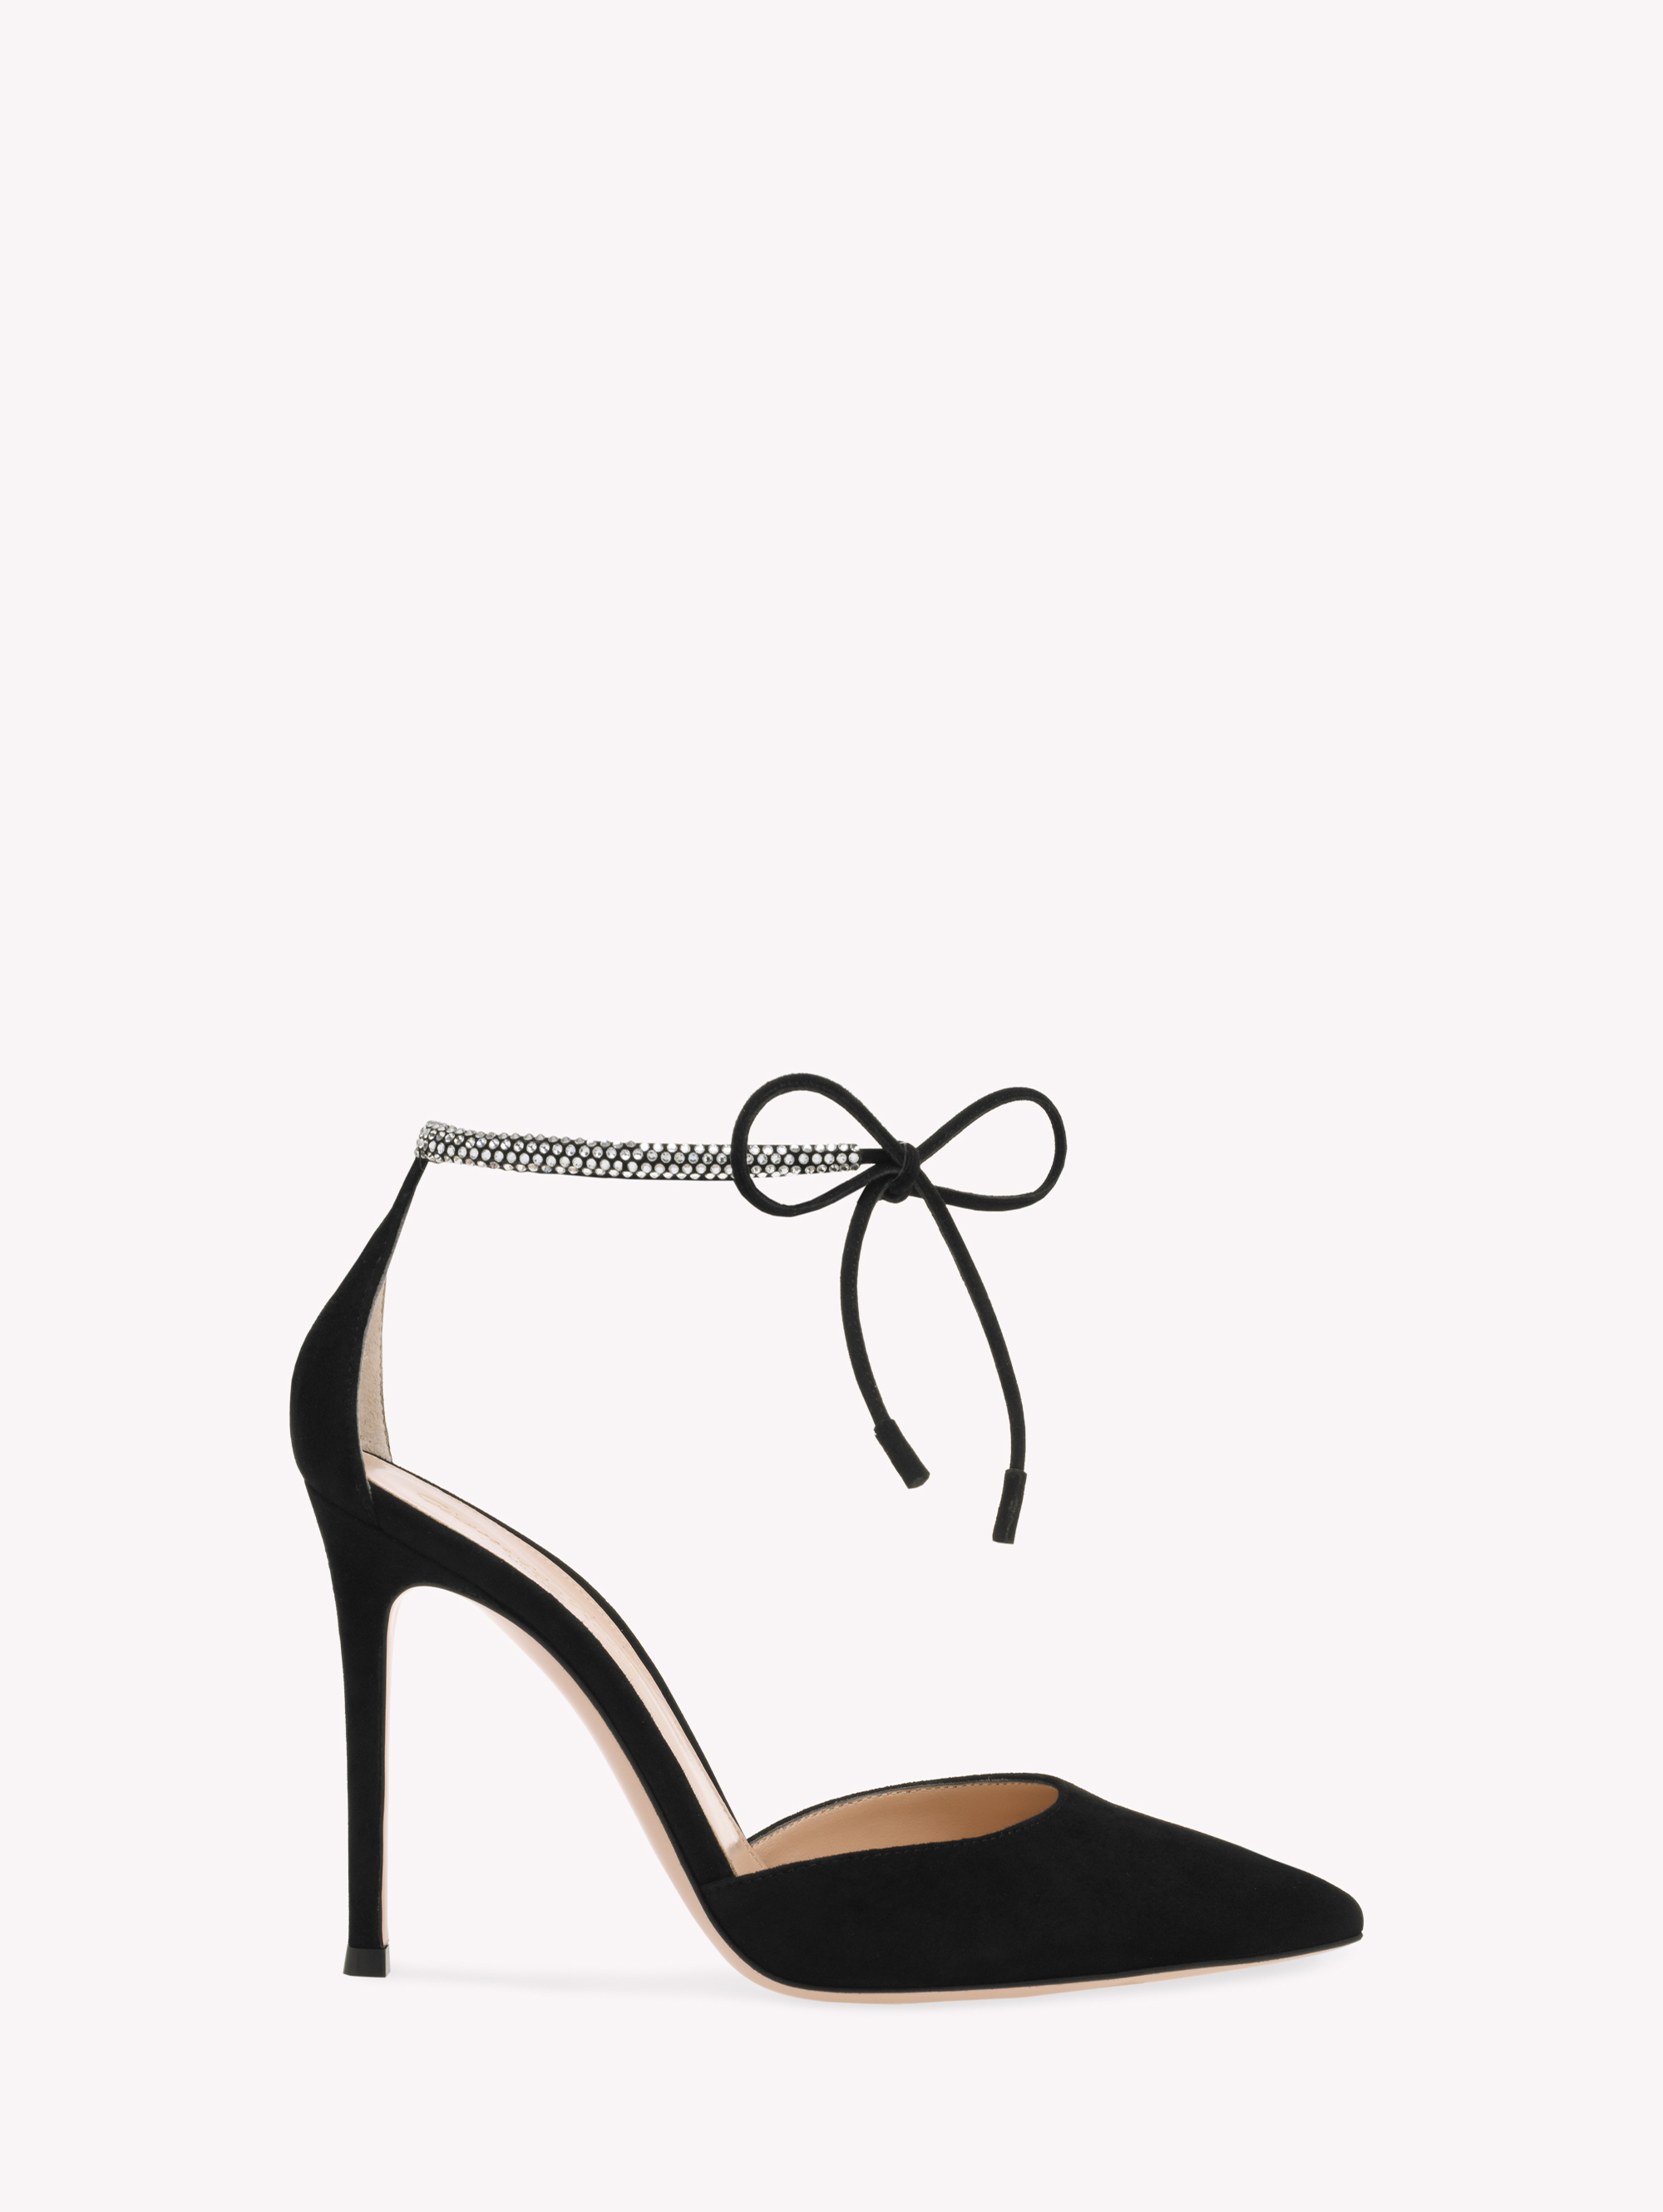 Buy MONTECARLO D'ORSAY for AED 4220.00 | Gianvito Rossi Global